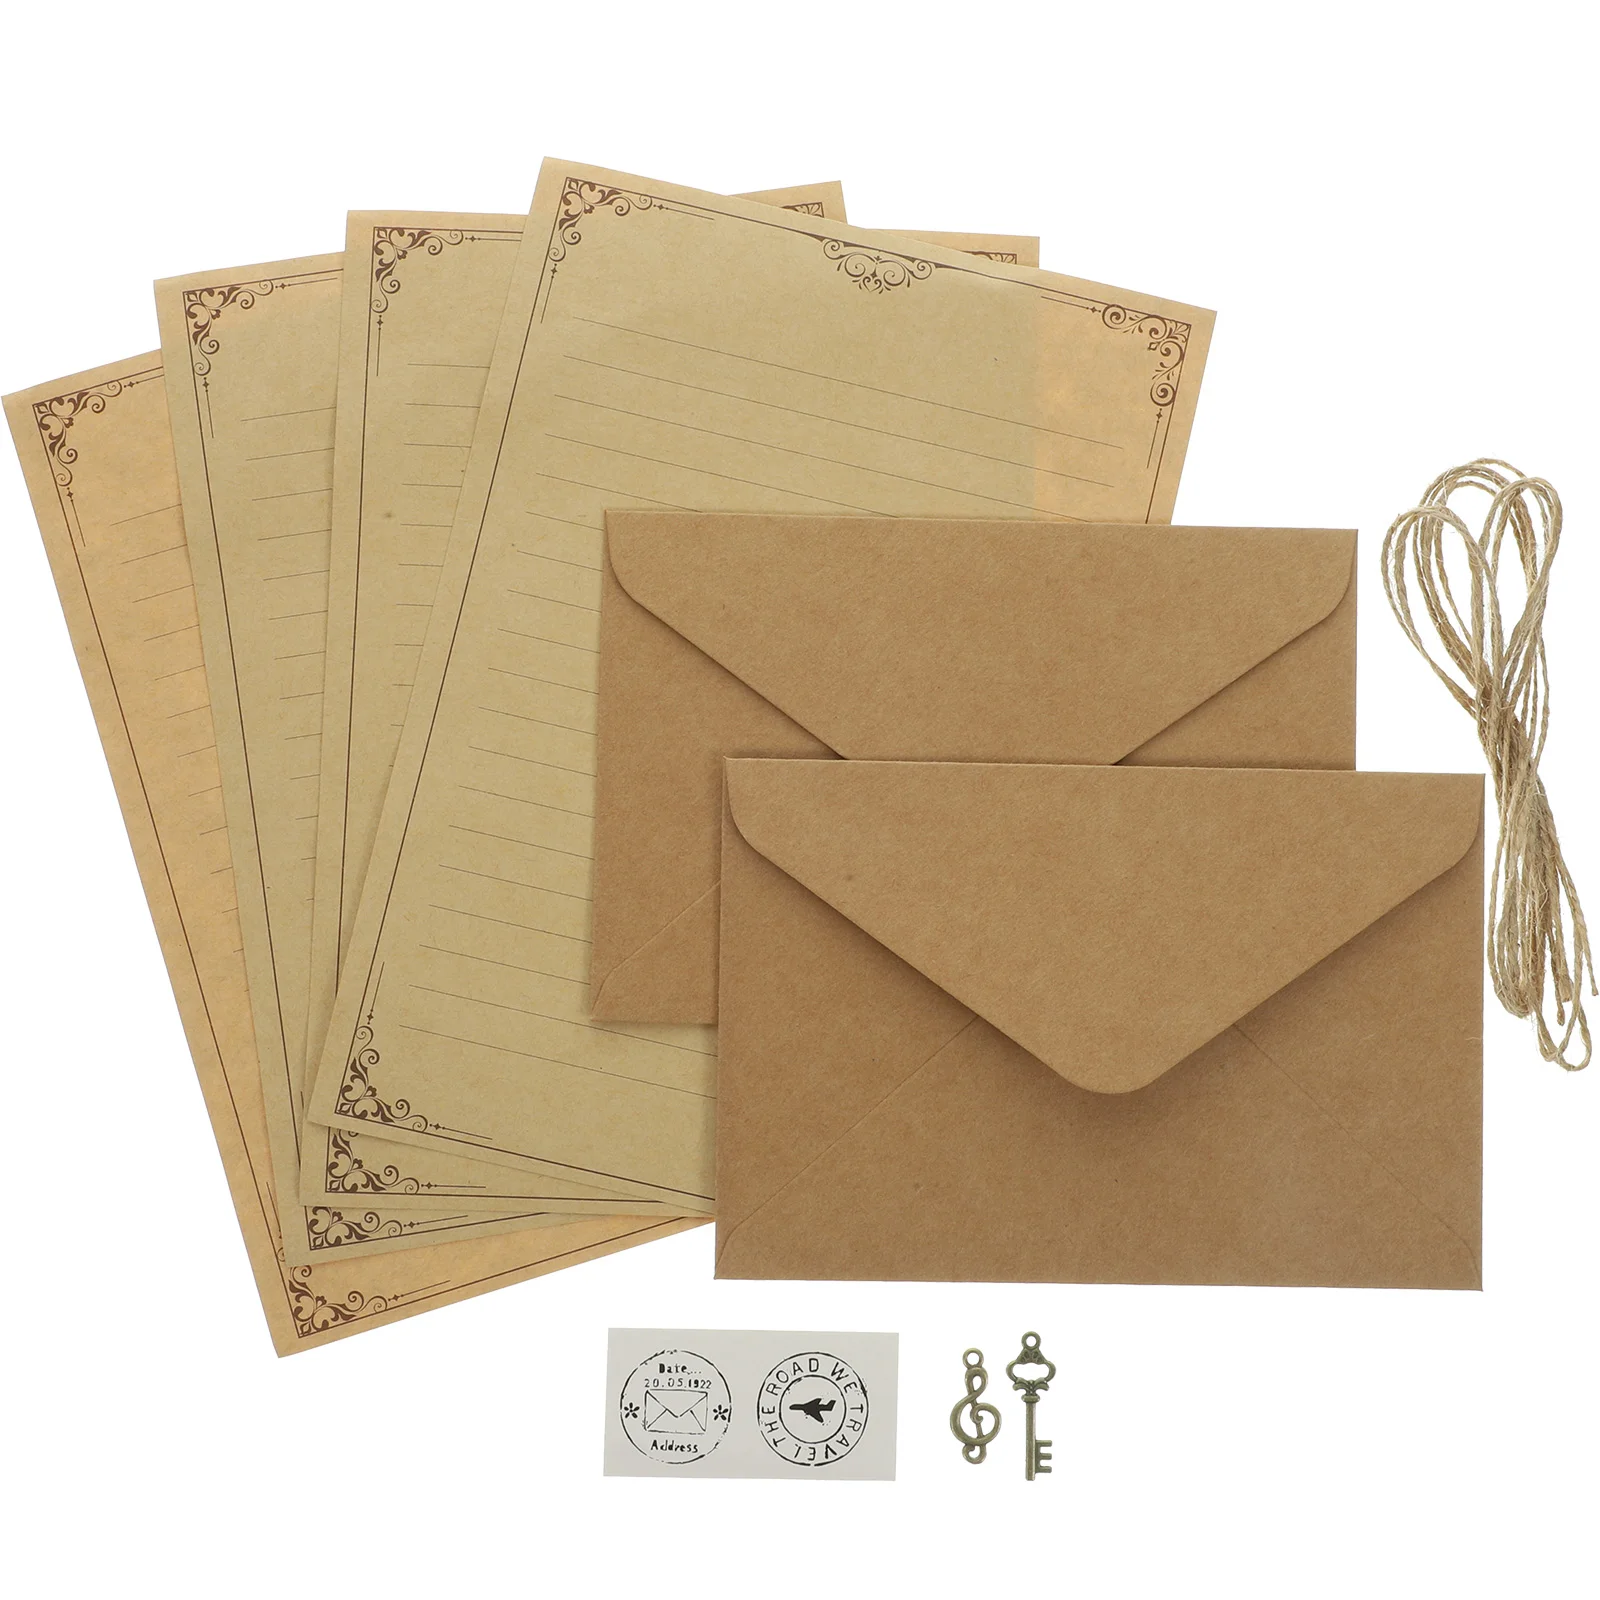 

2 Sets Retro Letter Papers Vintage Stationary Packing Envelope Writing Supplies Blank Envelopes Stationery